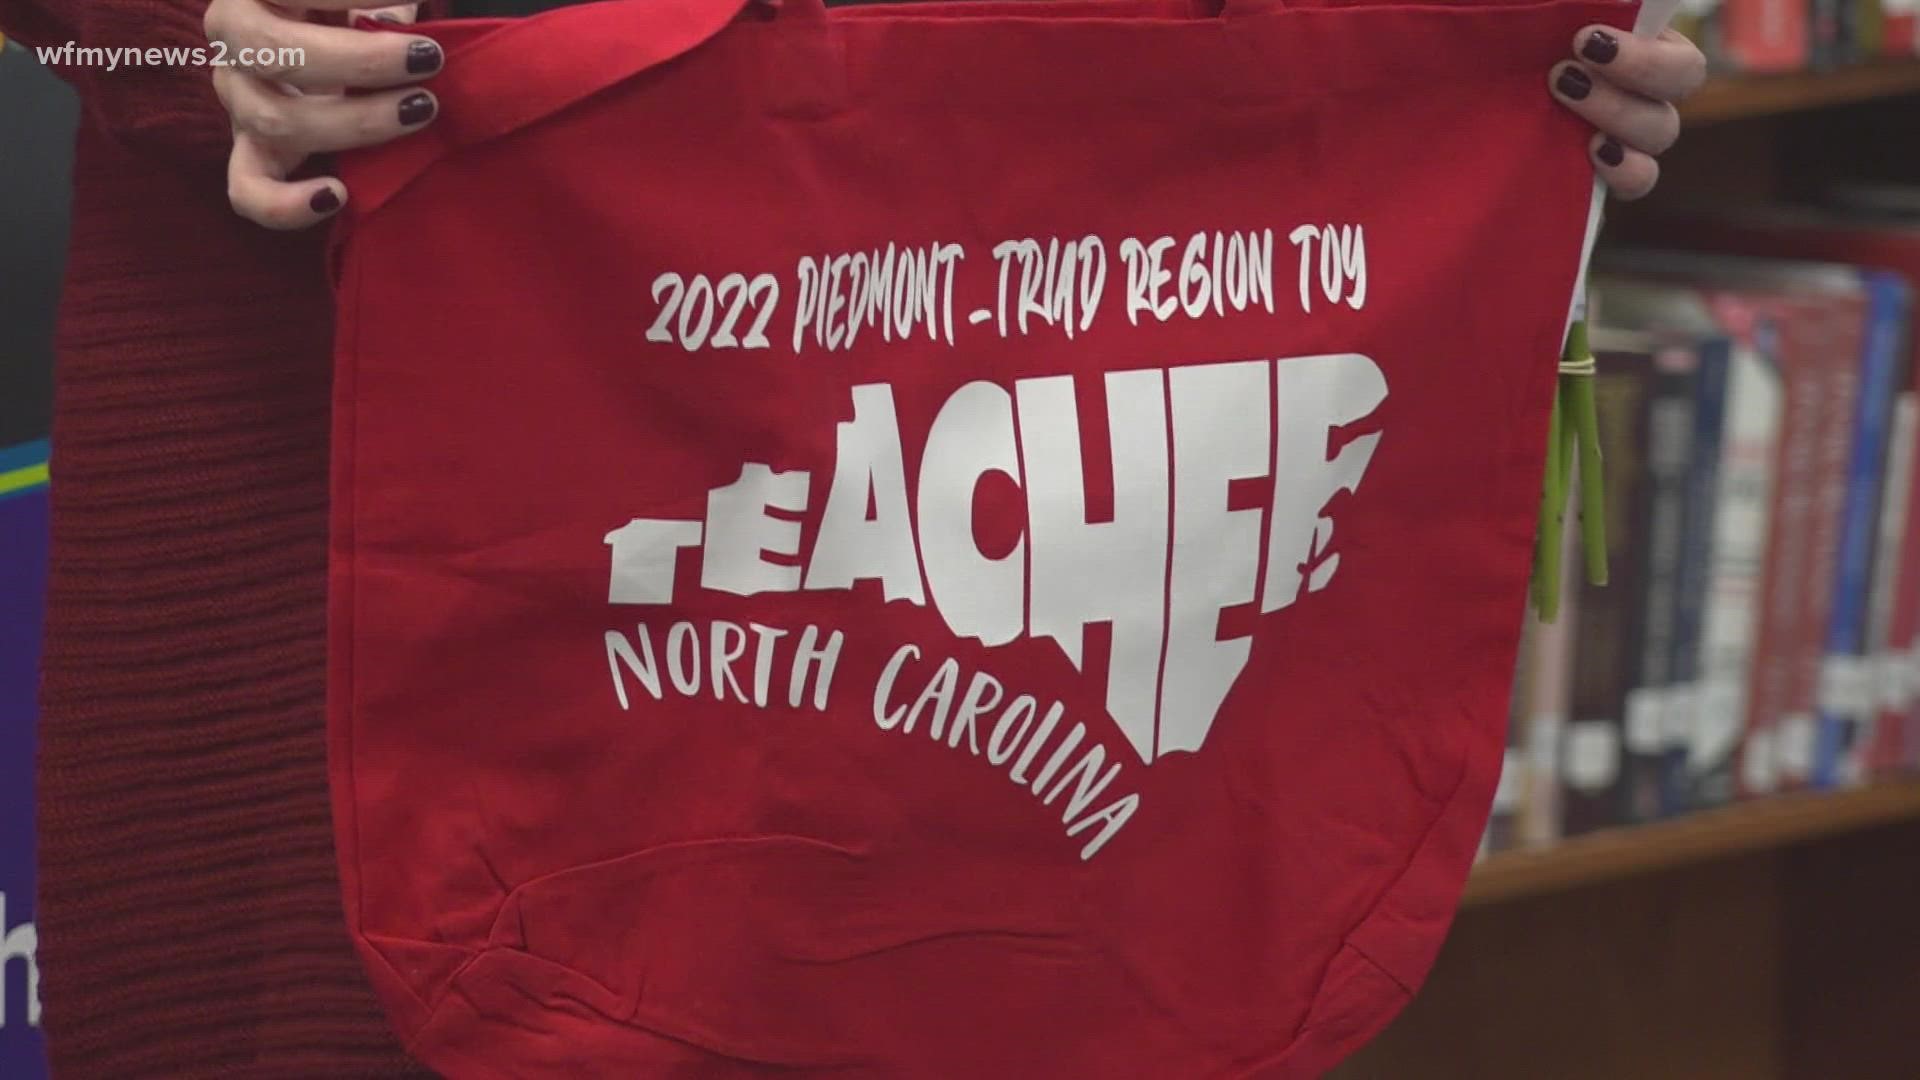 Guilford County Schools surprised a teacher at Northern Guilford with the Piedmont-Triad Region Teacher of the Year award